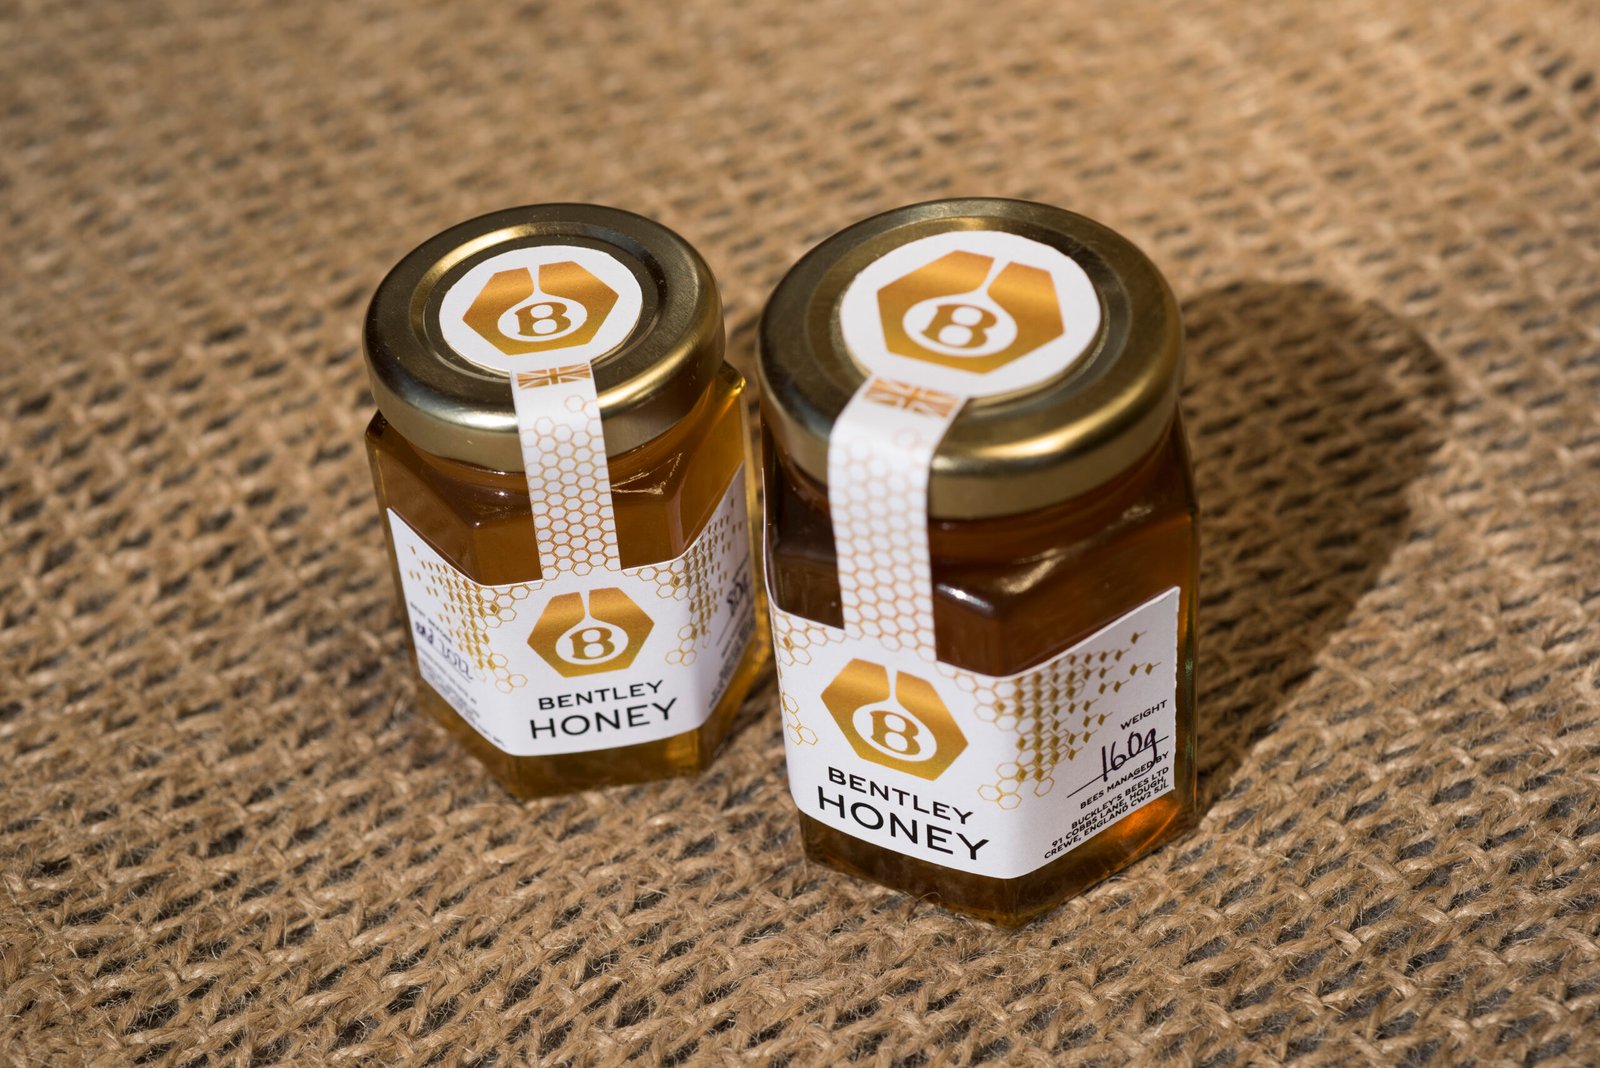 BENTLEY FLYING BEES REACH NEW MILESTONE AT CREWE’S EXCELLENCE CENTRE FOR HONEY PRODUCTION